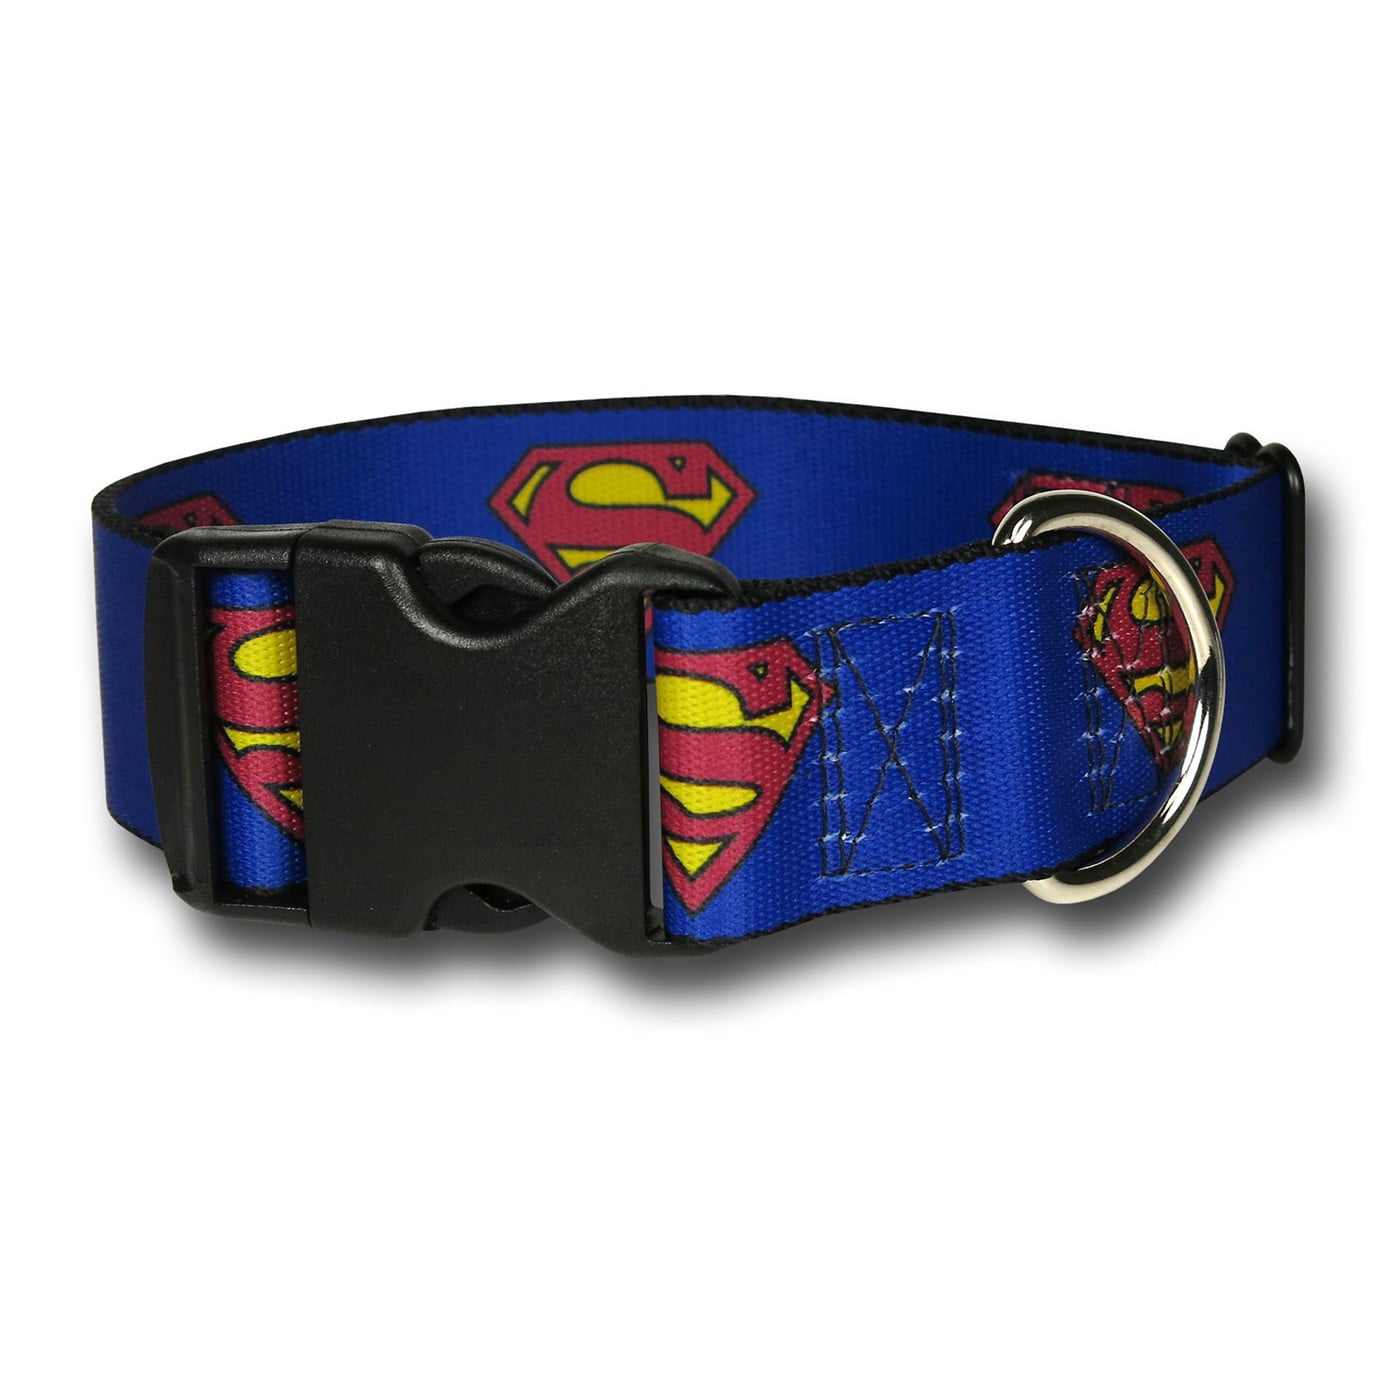 Buckle-Down Dog Leash Superman Shield Blue Available in Different Lengths and Widths for Small Medium Large Dogs and Cats